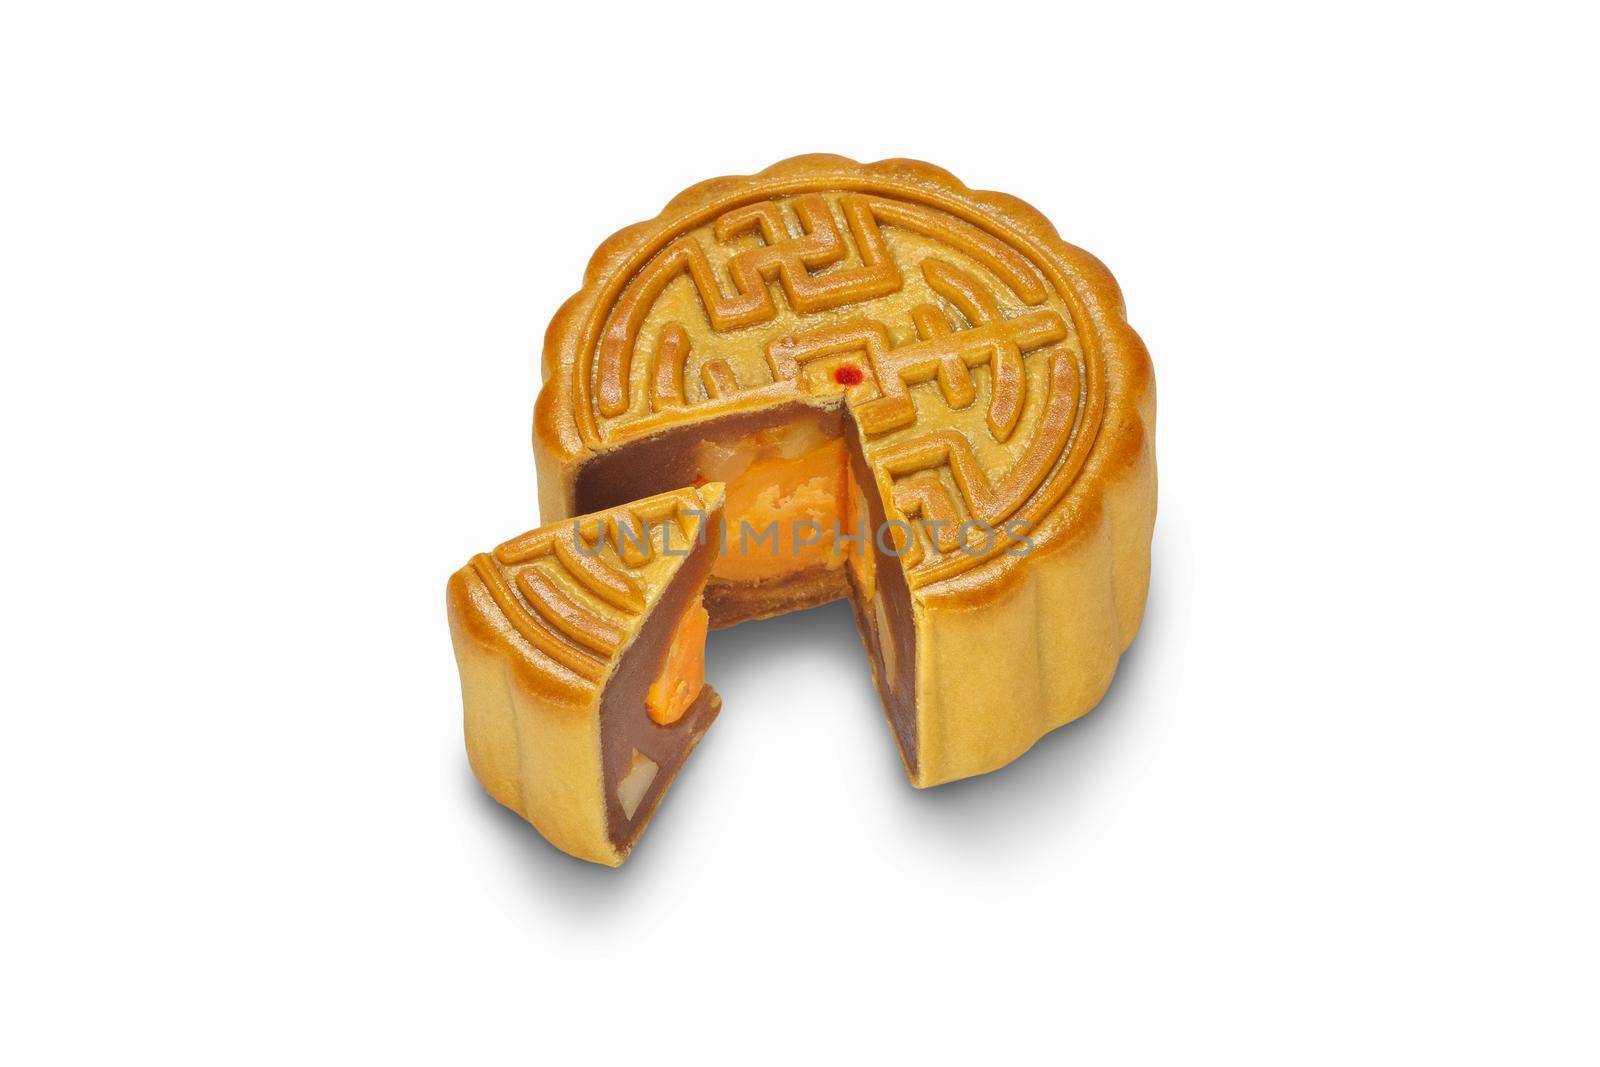 Traditional Mooncake With Durian And Egg Yolk Filling On white background